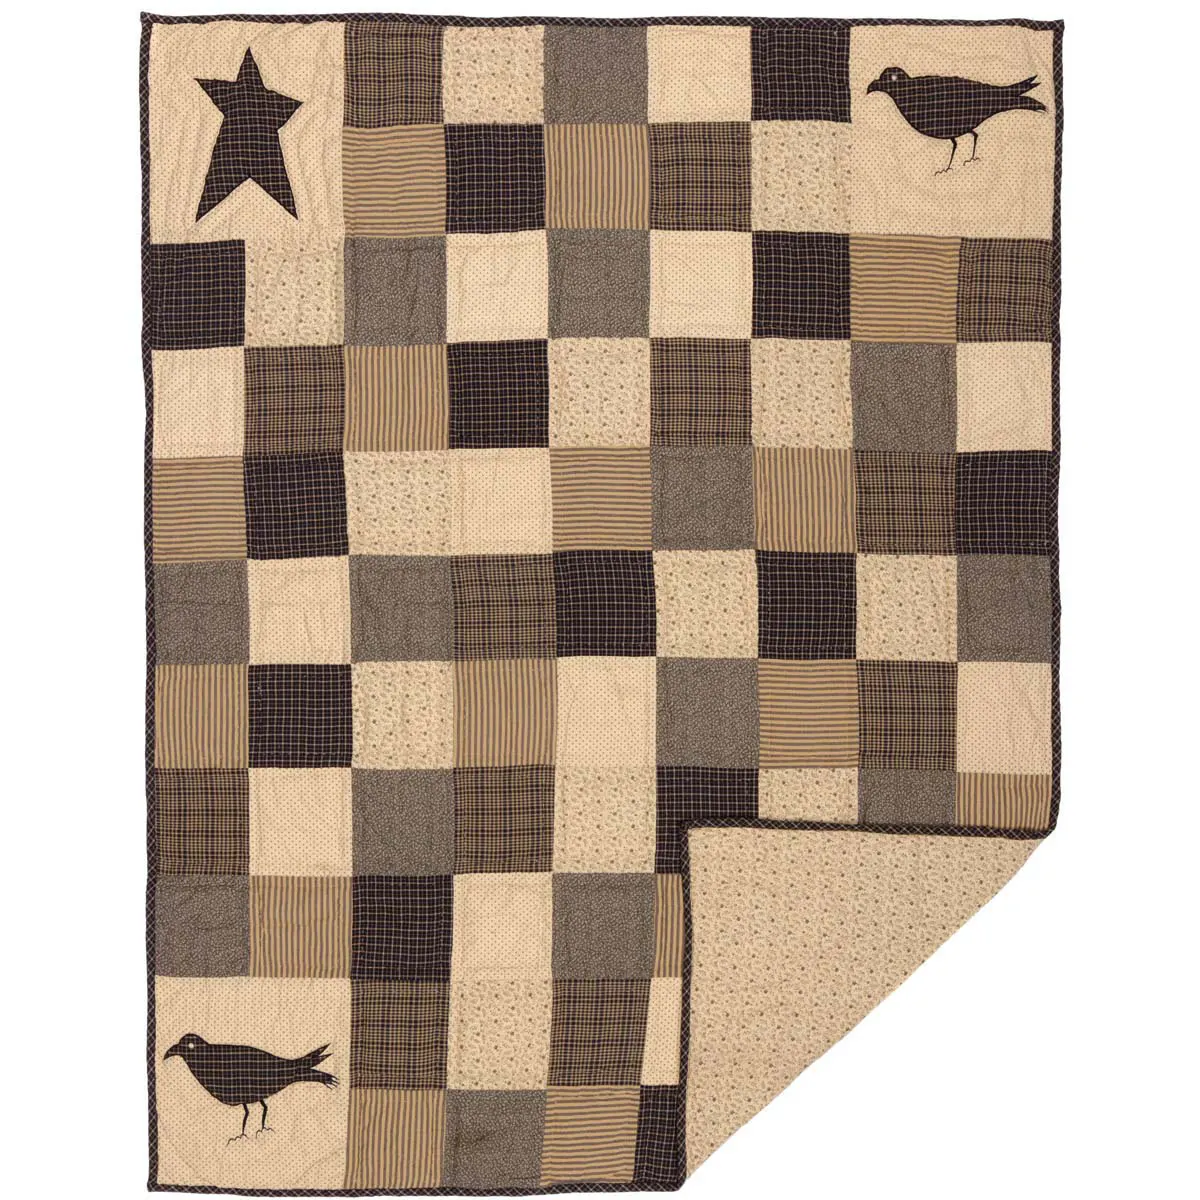 Kettle Grove Applique Crow and Star Quilted Throw 60x50 flat